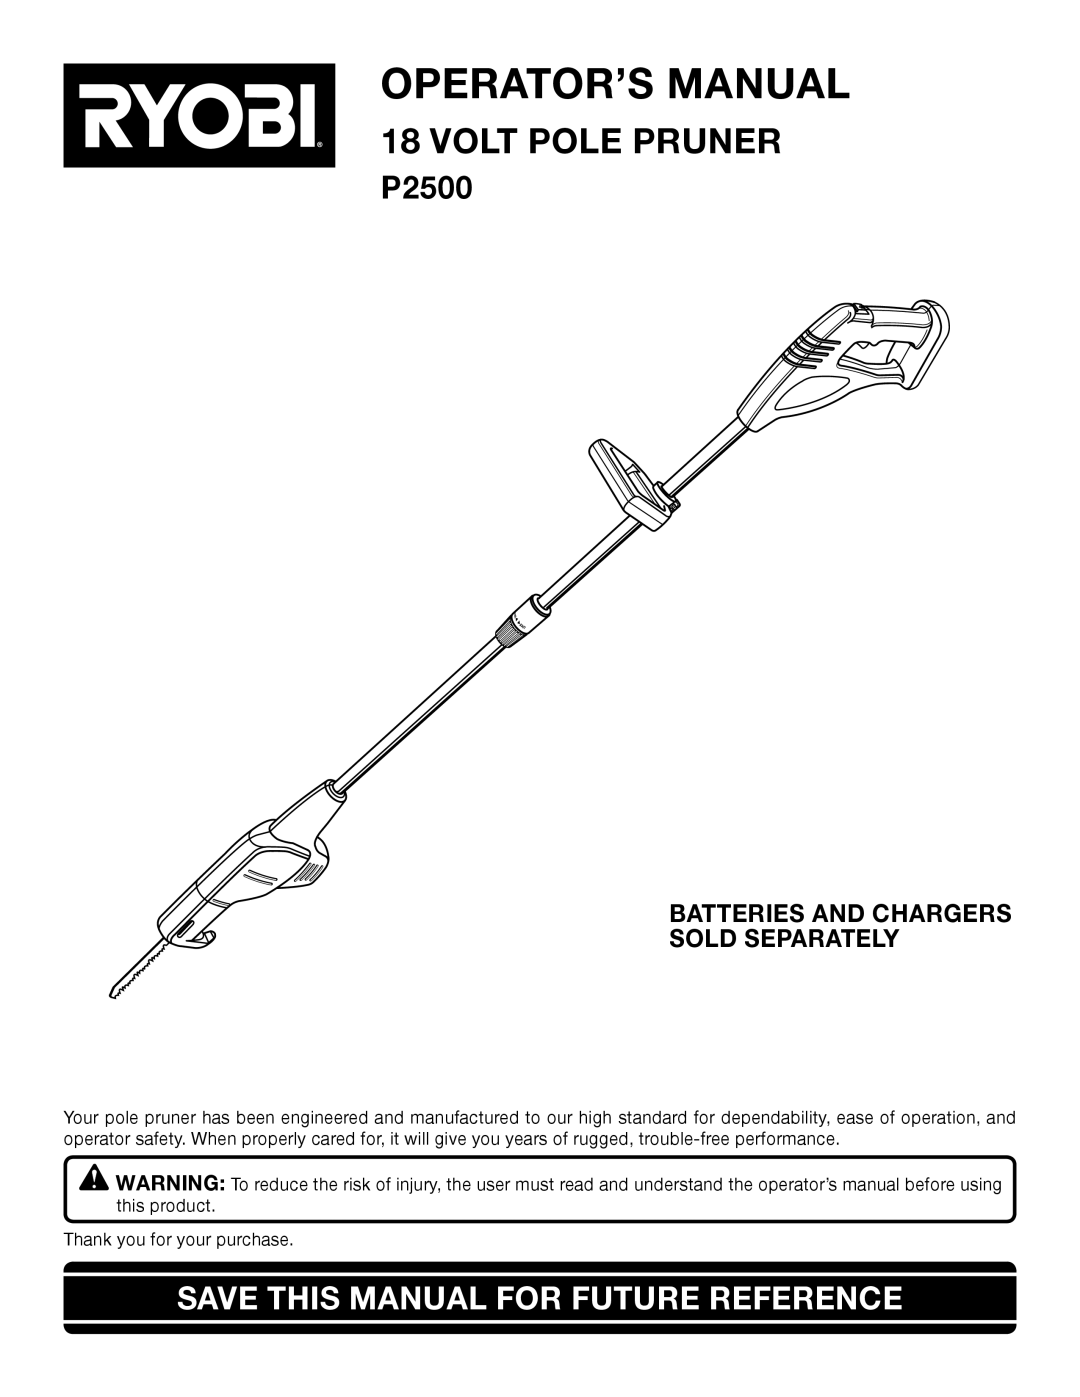 Ryobi Outdoor P2500 manual Operator’S Manual, Volt Pole Pruner, Save This Manual For Future Reference 